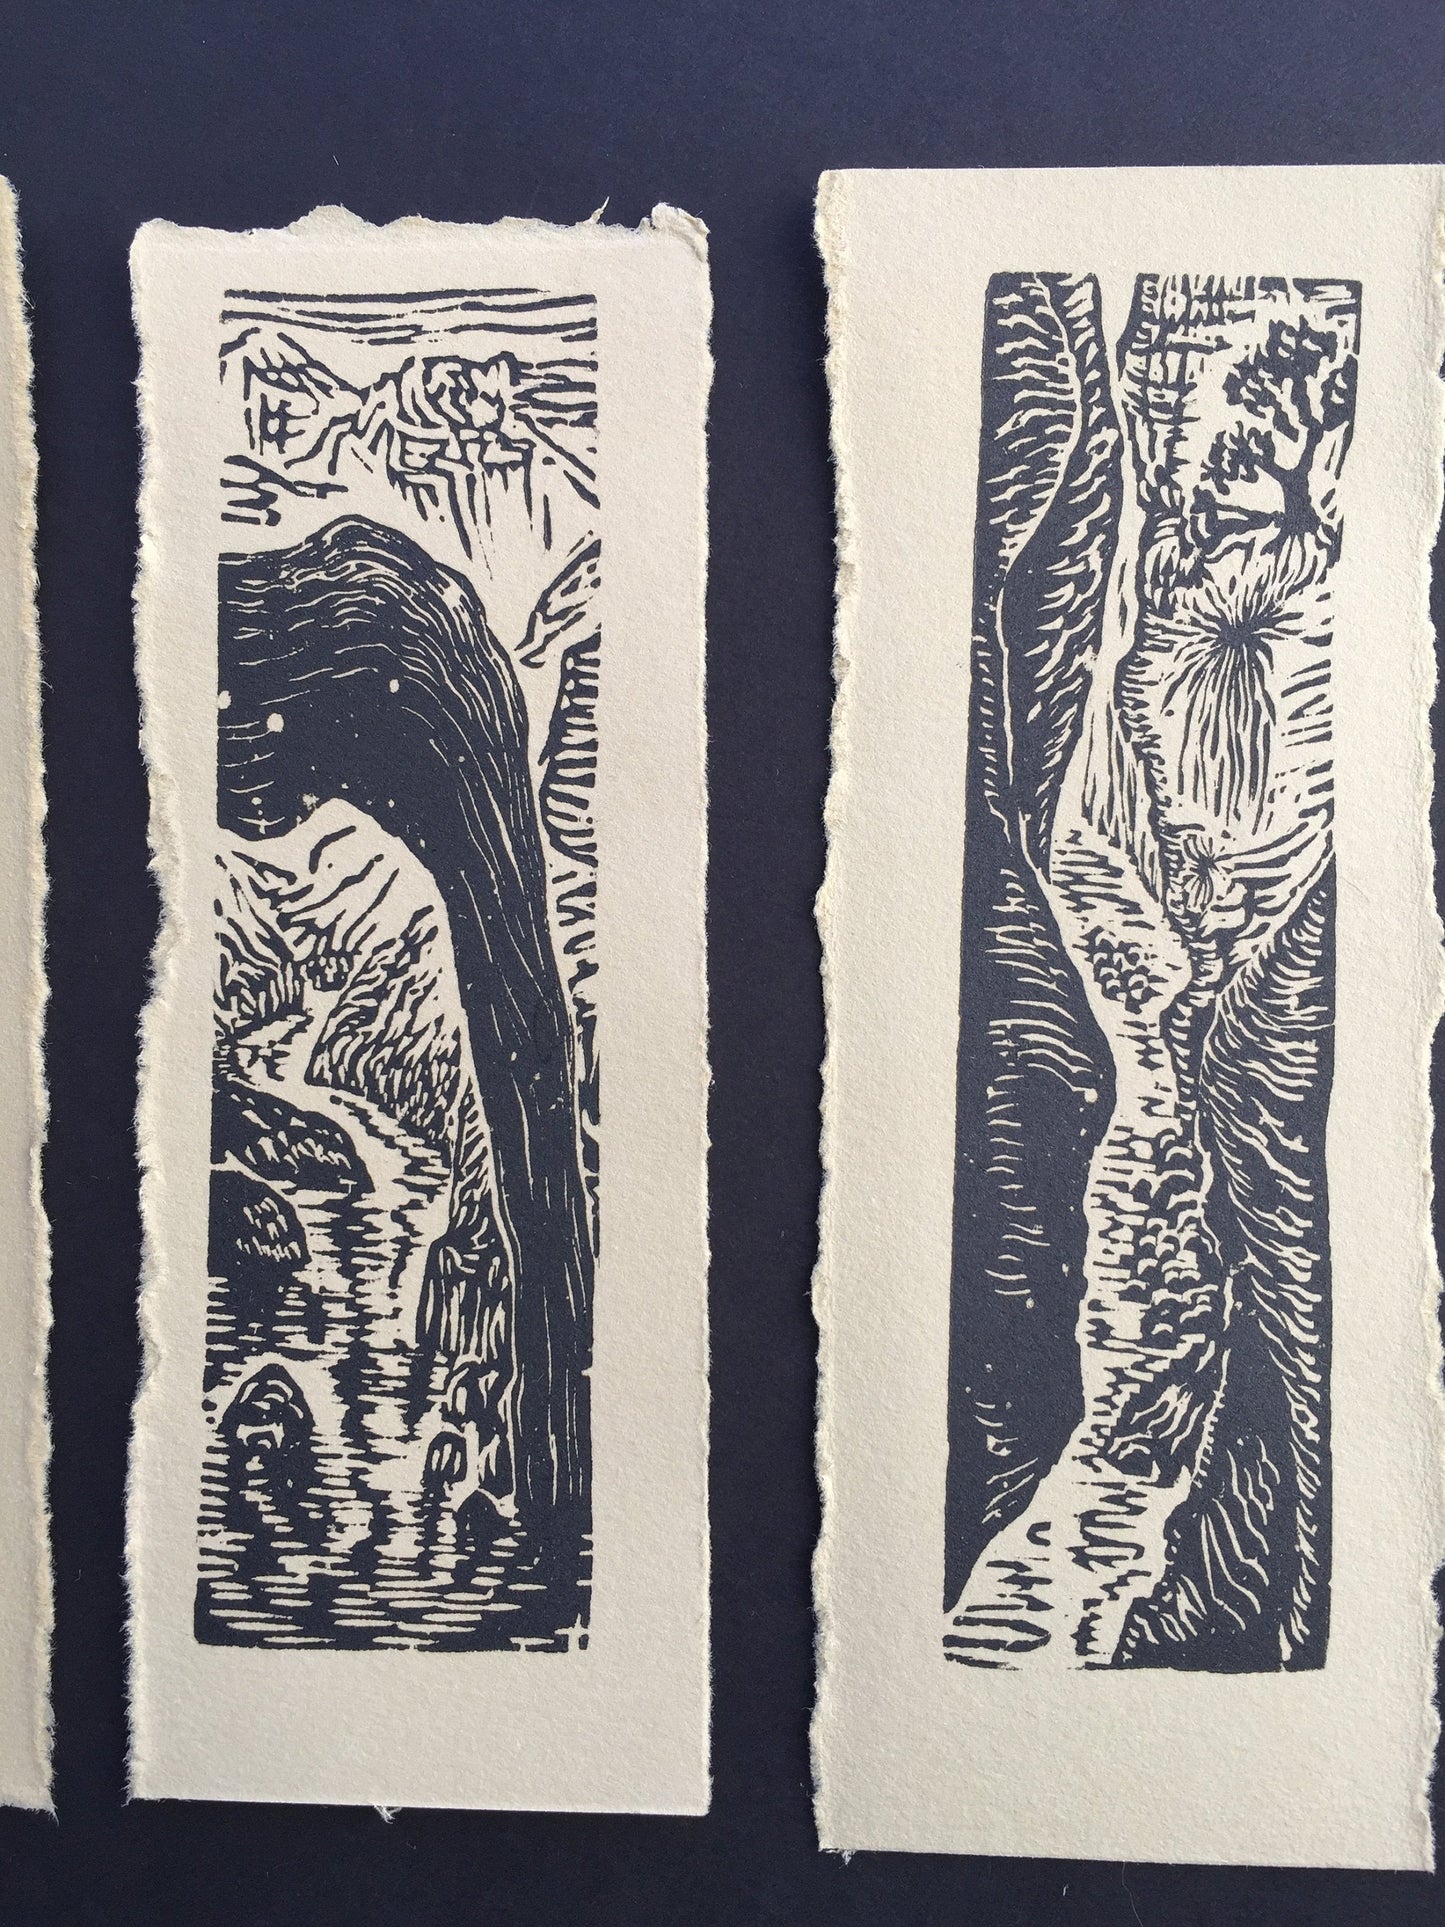 SET 4 Original Woodcut Prints Water in the Desert Landscape Collection